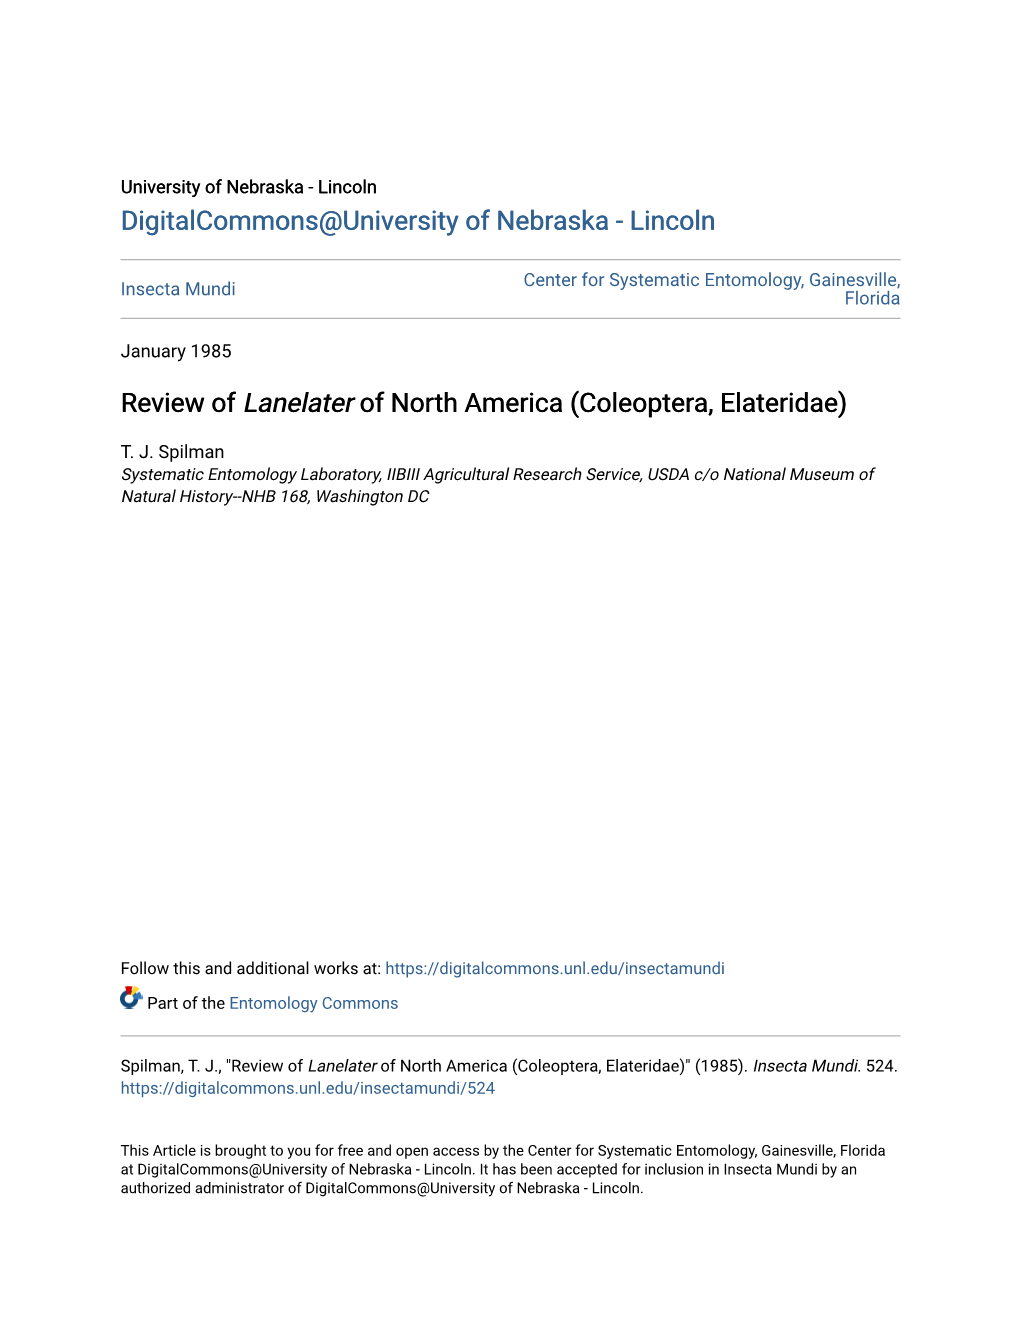 Review of Lanelater of North America (Coleoptera, Elateridae)